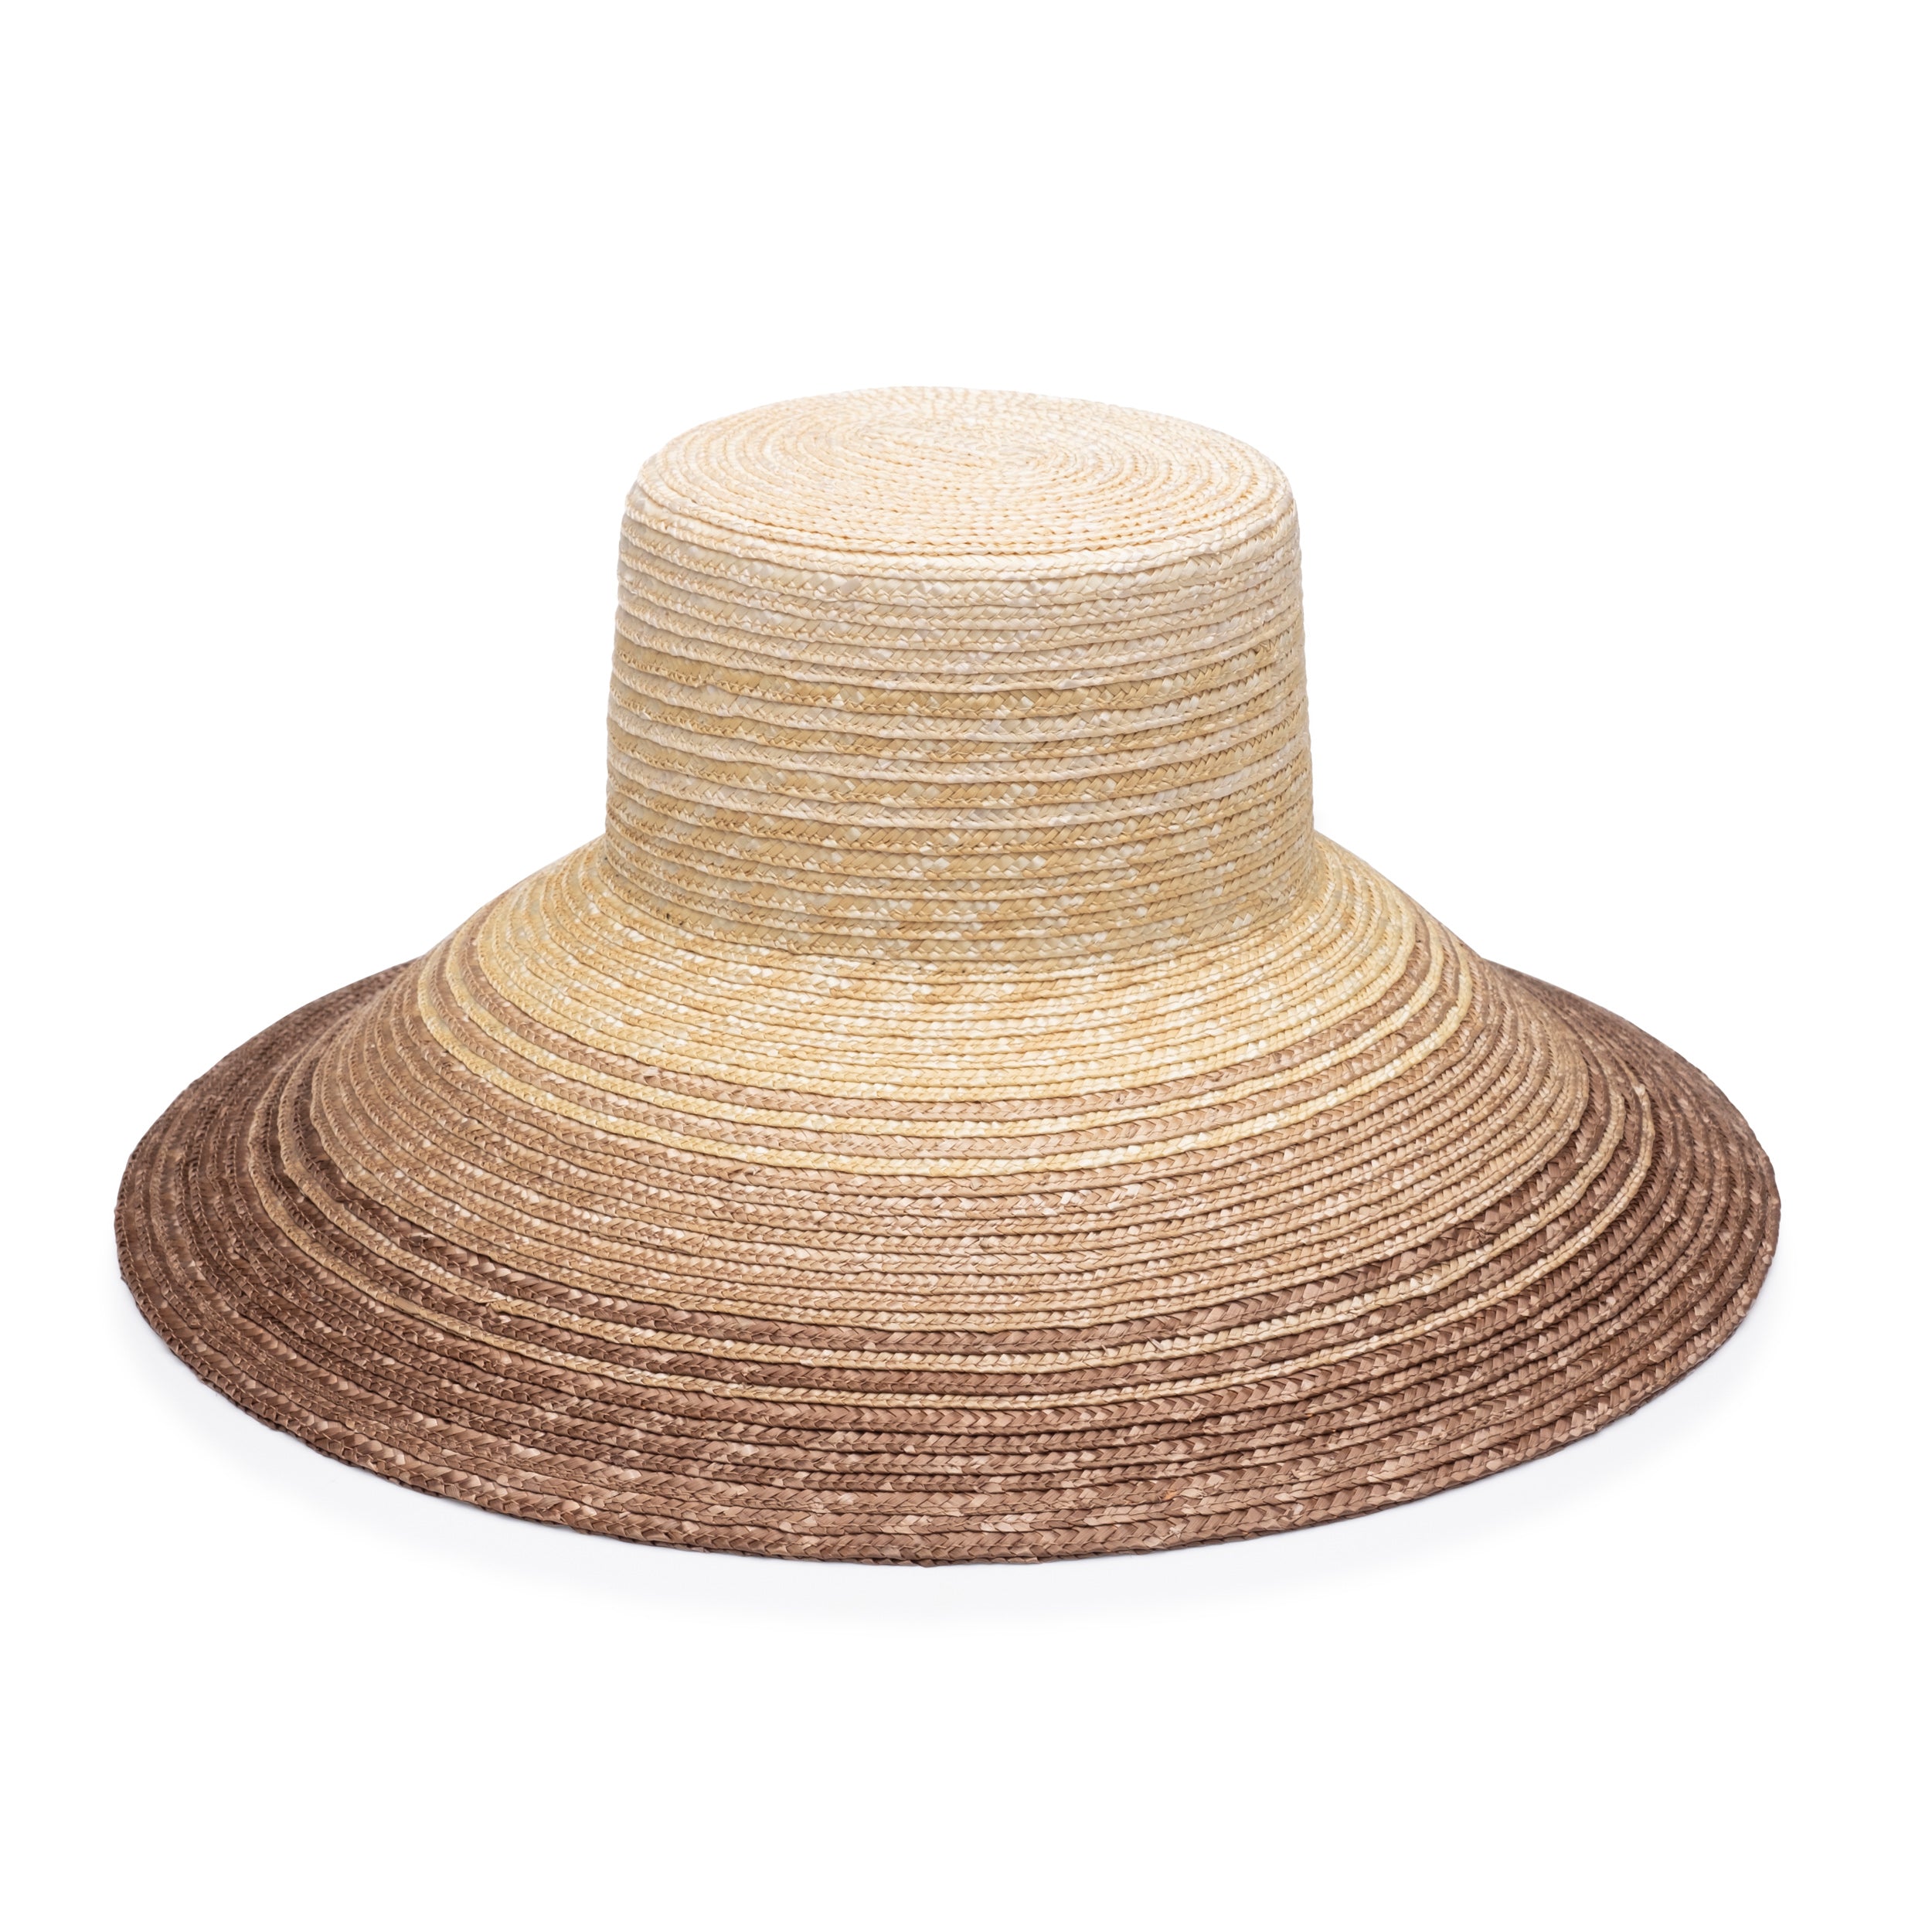 Flat shot of Mirabel sunhat in Ivory/natural/fawn.